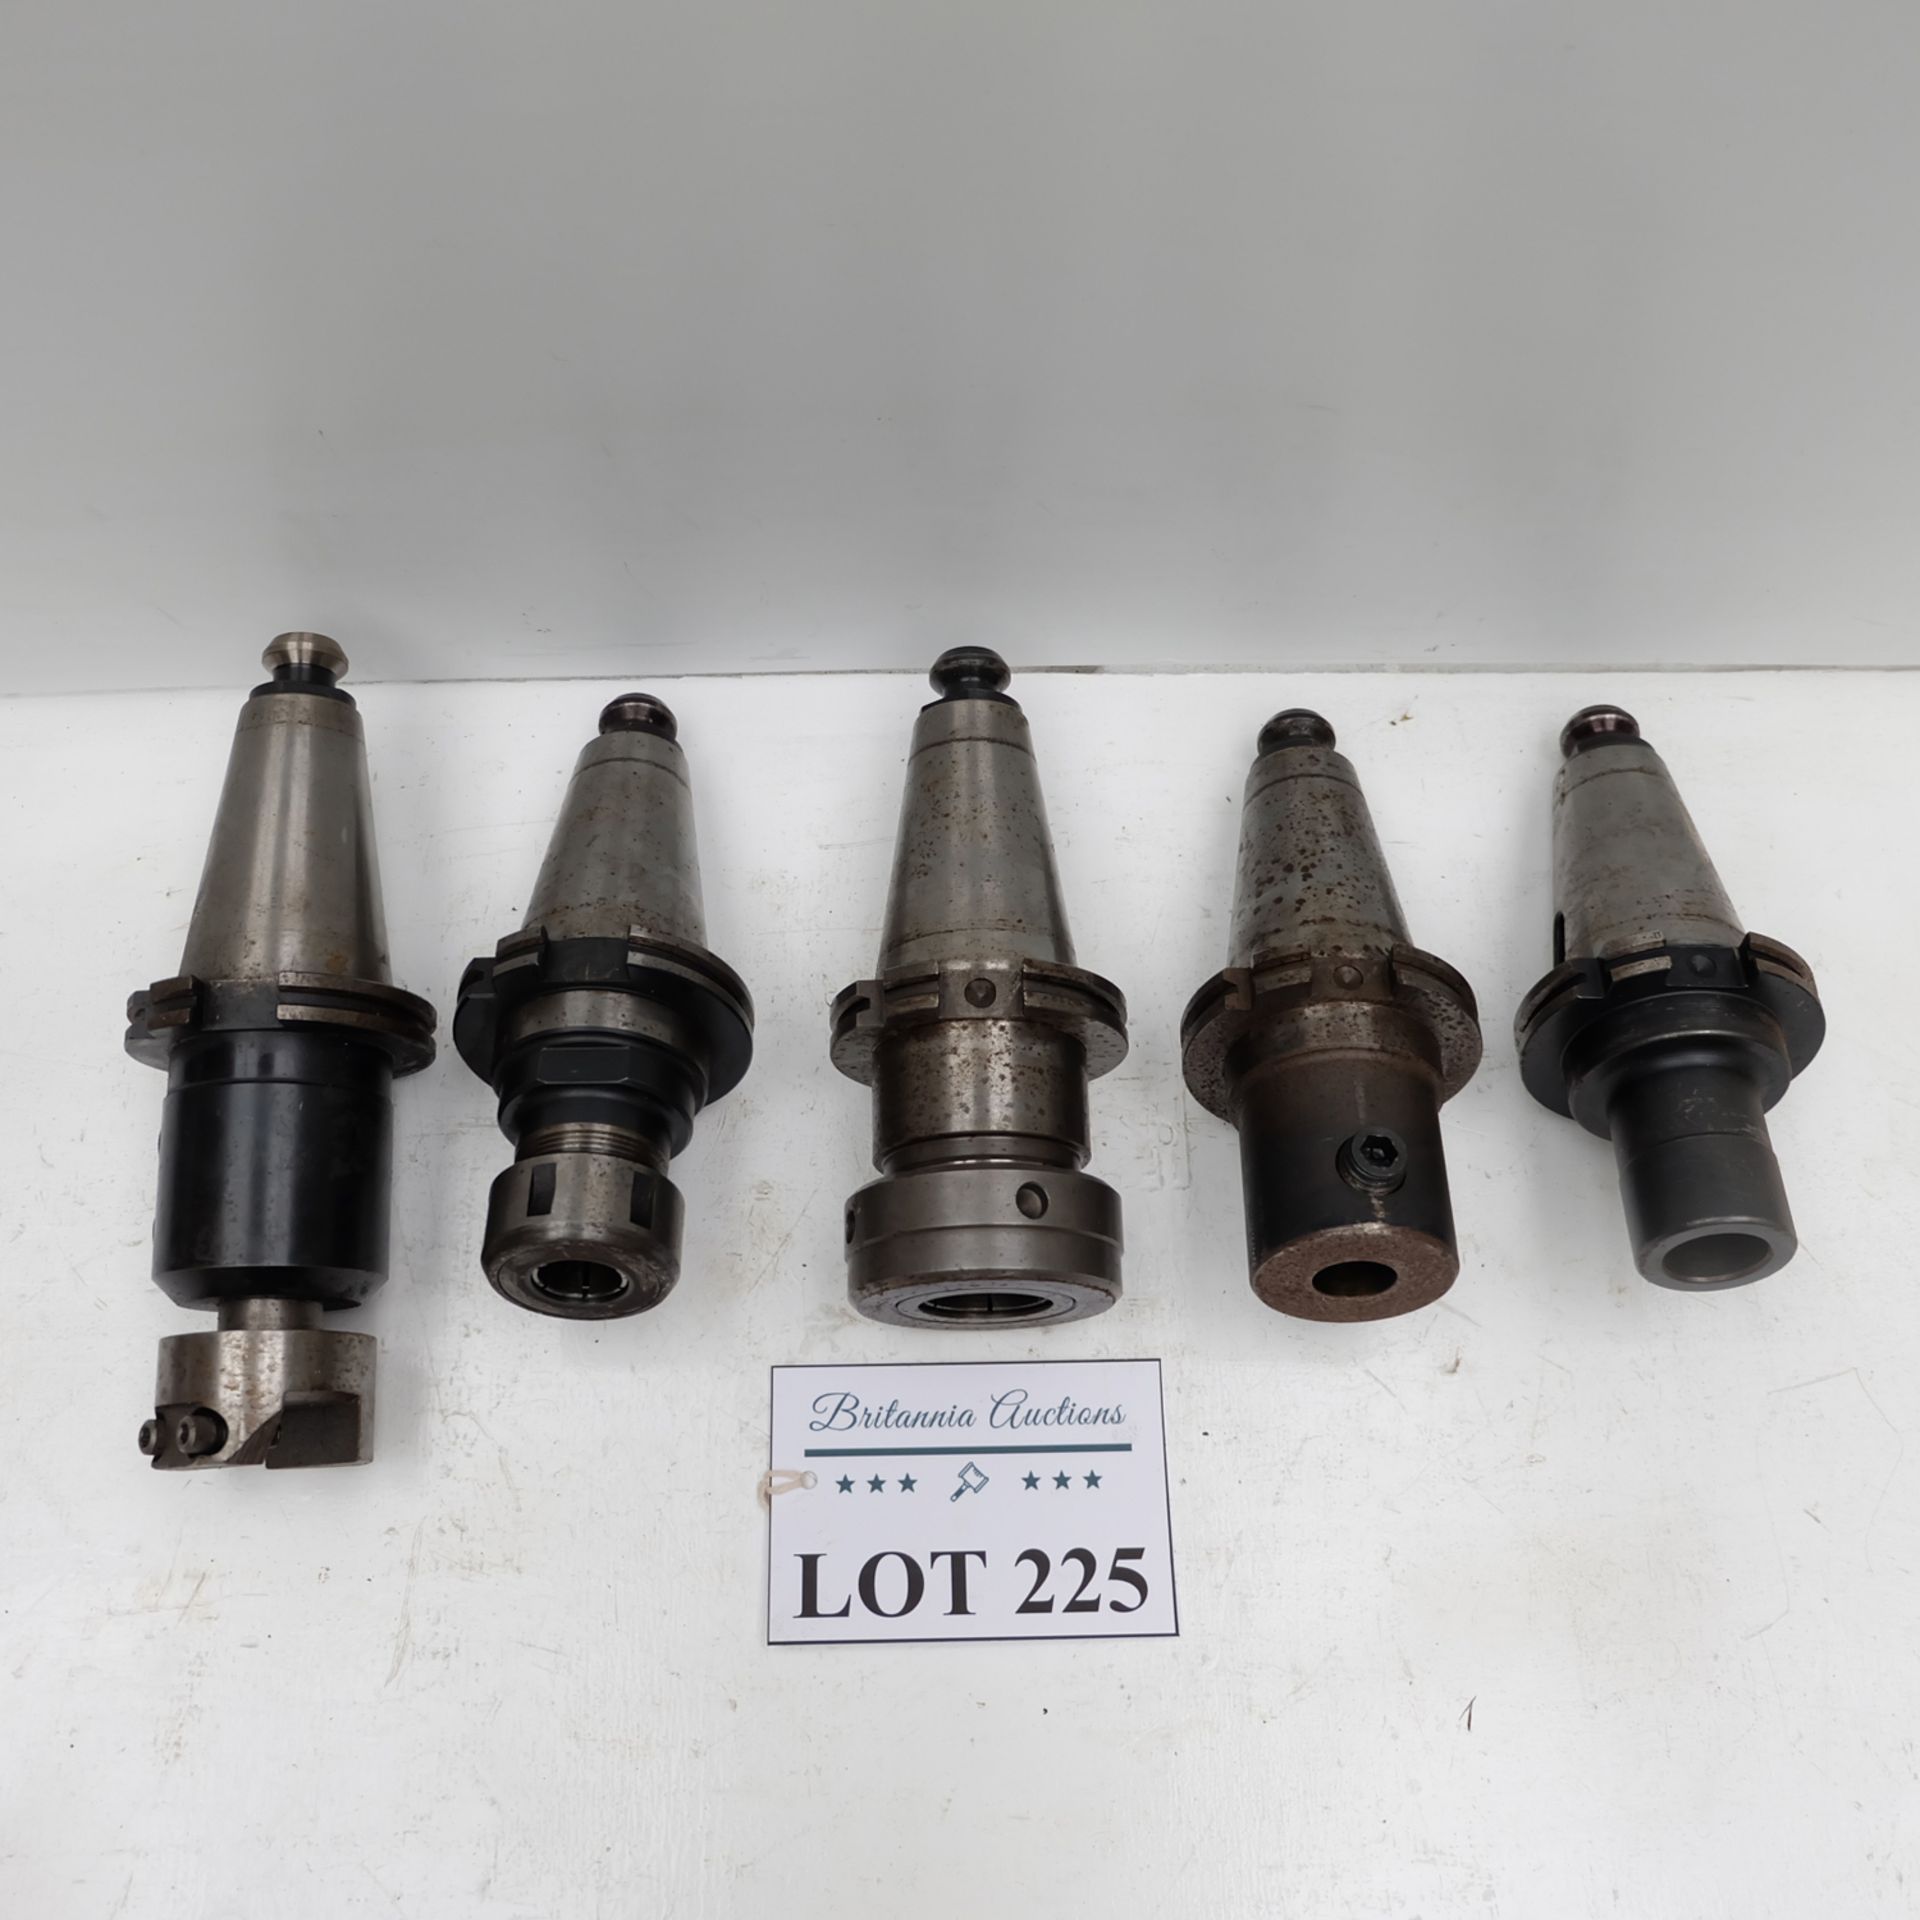 Quantity of 5 x SK 50 Spindle Tooling. - Image 2 of 3